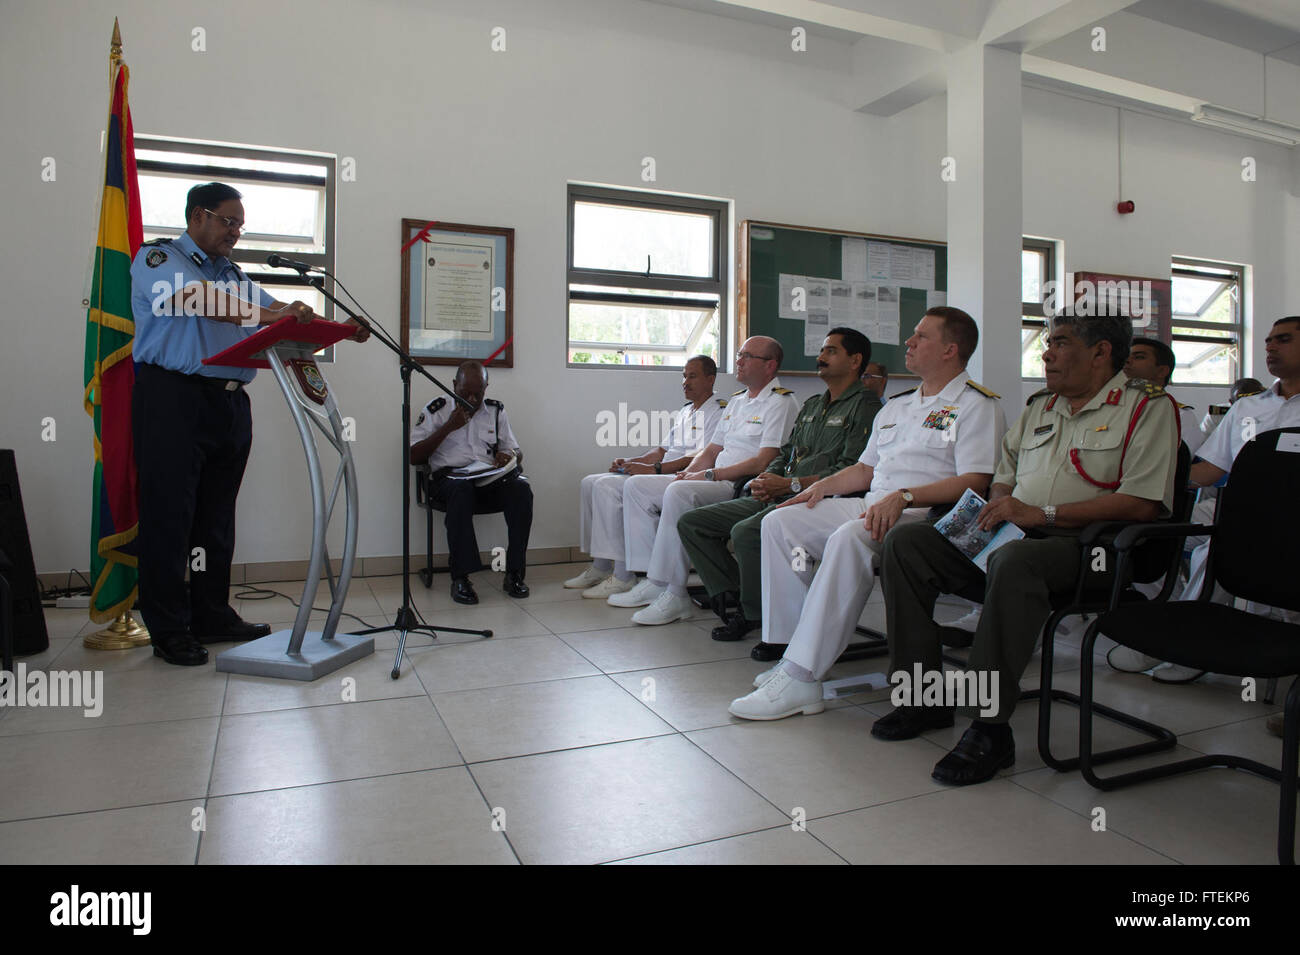 LE CHALAND, Mauritius (Feb. 4, 2015) Mauritius Commissioner of Police Dhun Iswur Rampersad addresses exercise attendees at the Exercise Cutlass Express 2015 closing ceremony. Exercise Cutlass Express 2015, sponsored by U.S. Africa Command, is designed to improve regional cooperation, maritime domain awareness, and information sharing practices to increase capabilities of East African and Indian Ocean nations to counter sea-based illicit activity. (U.S. Navy photo by Mass Communication Specialist 1st Class David R. Krigbaum/Released) Stock Photo